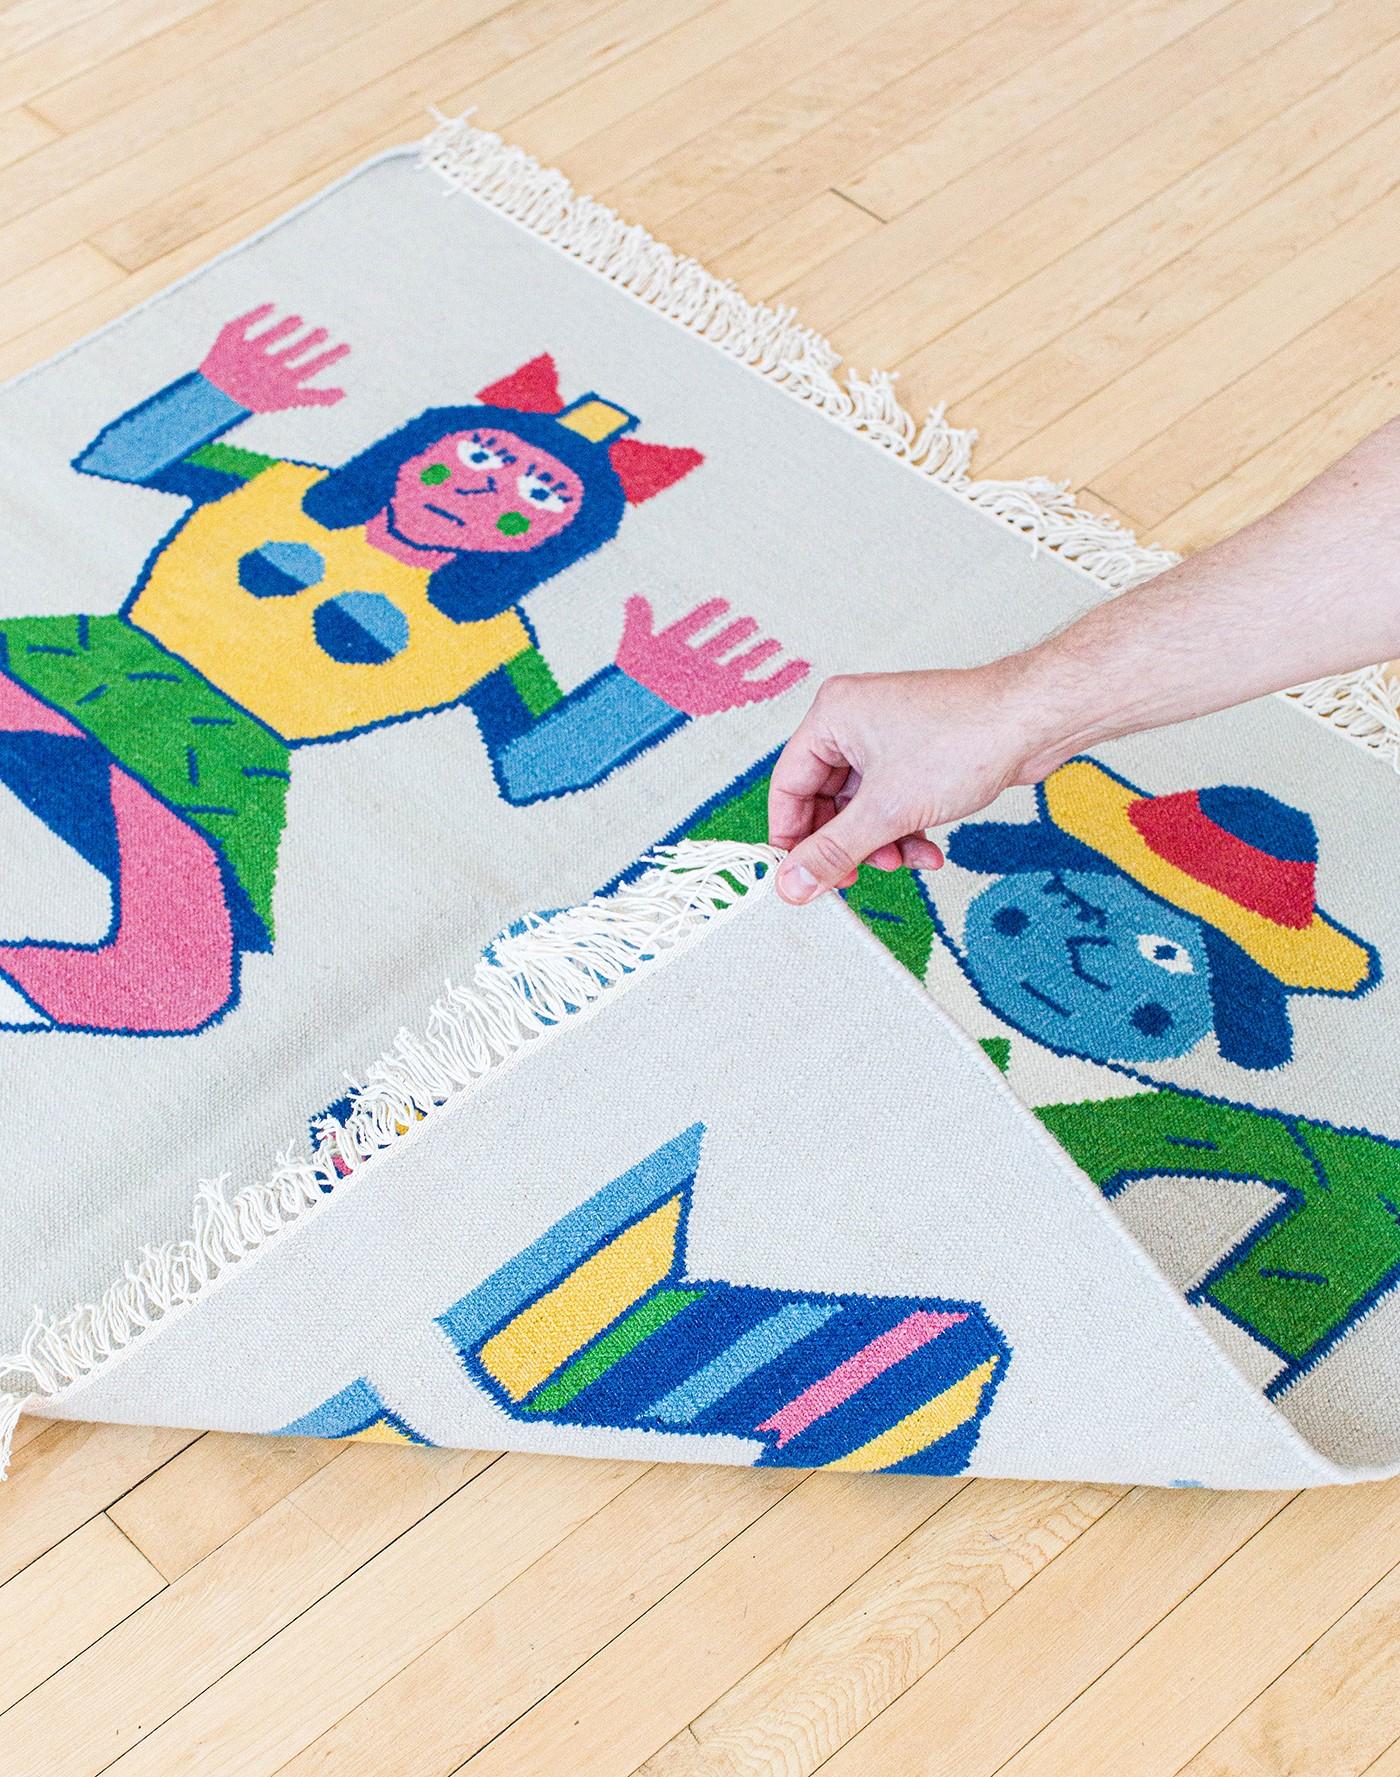 Together Apart is a collaboration between artist Andy Rementer (USA) and Case Studyo (Belgium). This colorful and playful handwoven kilim rug is produced in an edition of 50. The rug shows a couple that at first glance appear to be dancing. The